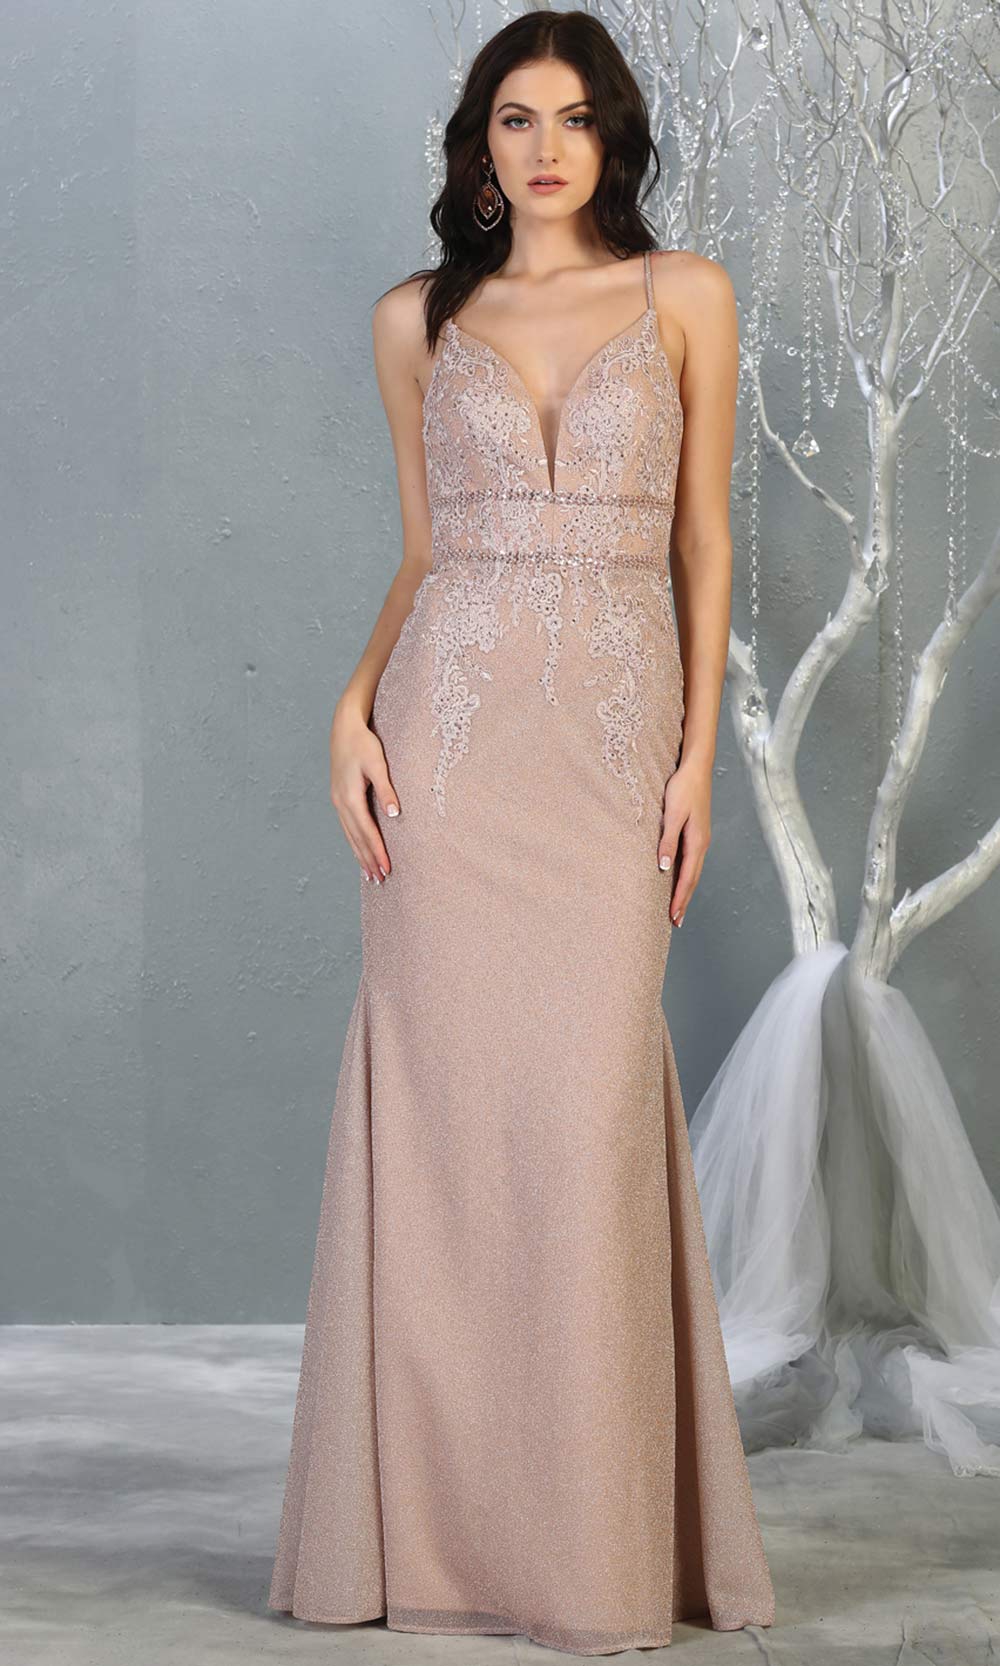 Mayqueen MQ1796 long rose gold v neck evening fitted dress. Full length rose gold glittery gown w/straps is perfect for  enagagement/e-shoot dress, formal wedding guest, indowestern gown, evening party dress, prom, bridesmaid. Plus sizes avail.jpg.jpg